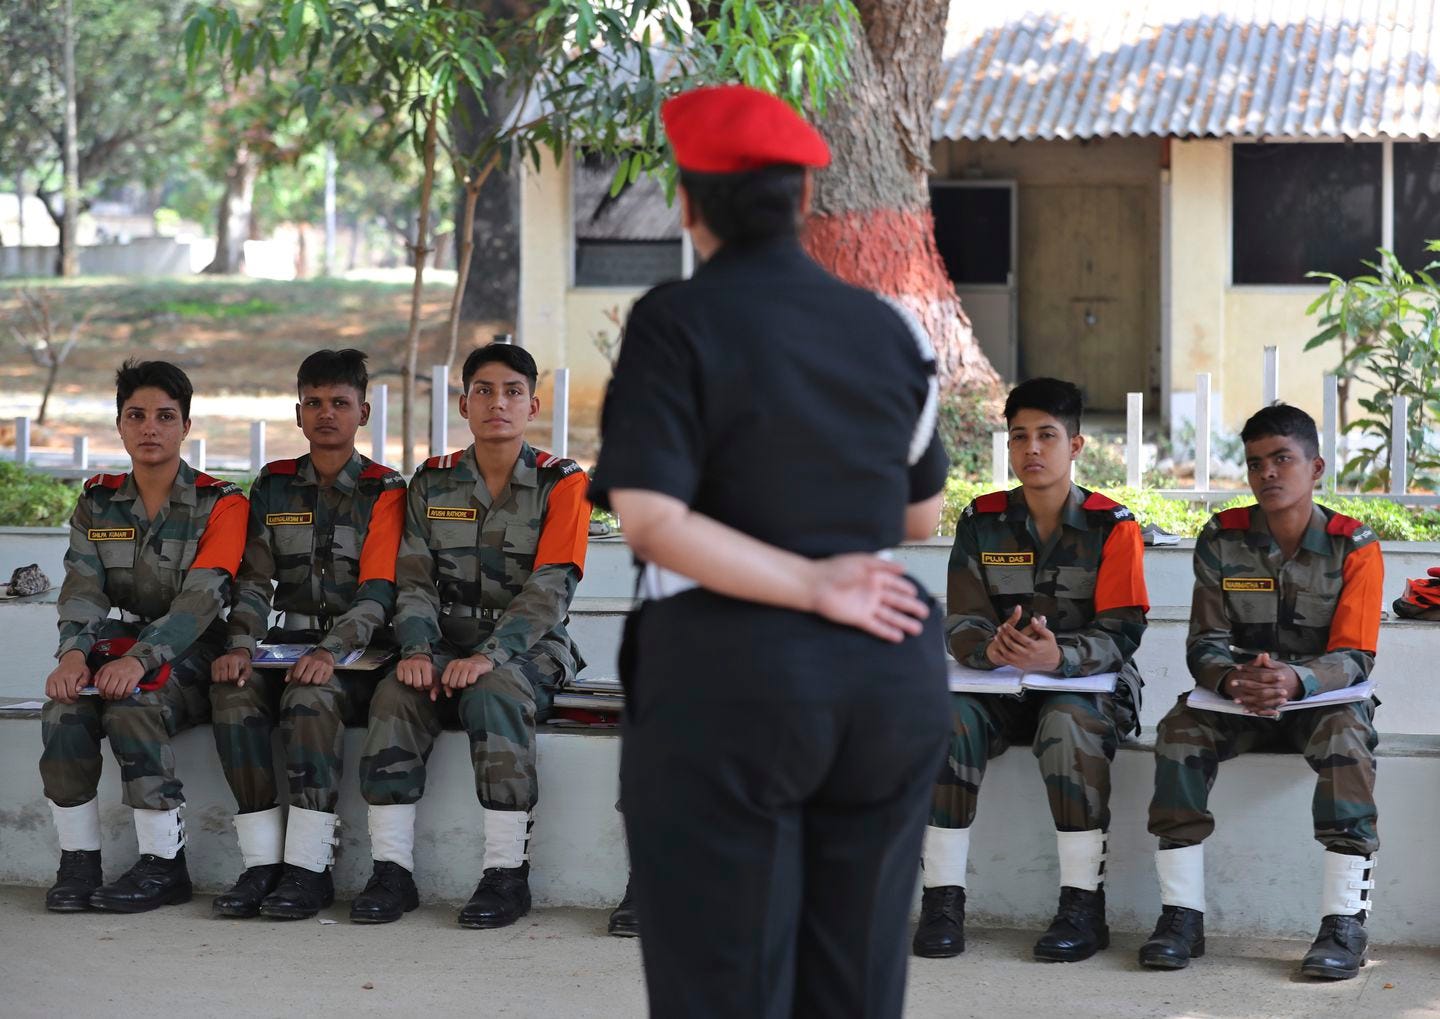 Indian army women recruits attended a class as part of their training before they are inducted as the first women soldiers below officer rank, during a media visit in Bengaluru, India. India’s top court on Wednesday allowed young women to take the entrance examination to the country's national defense academy for the first time in November, a watershed moment for them to join the armed forces as officers.